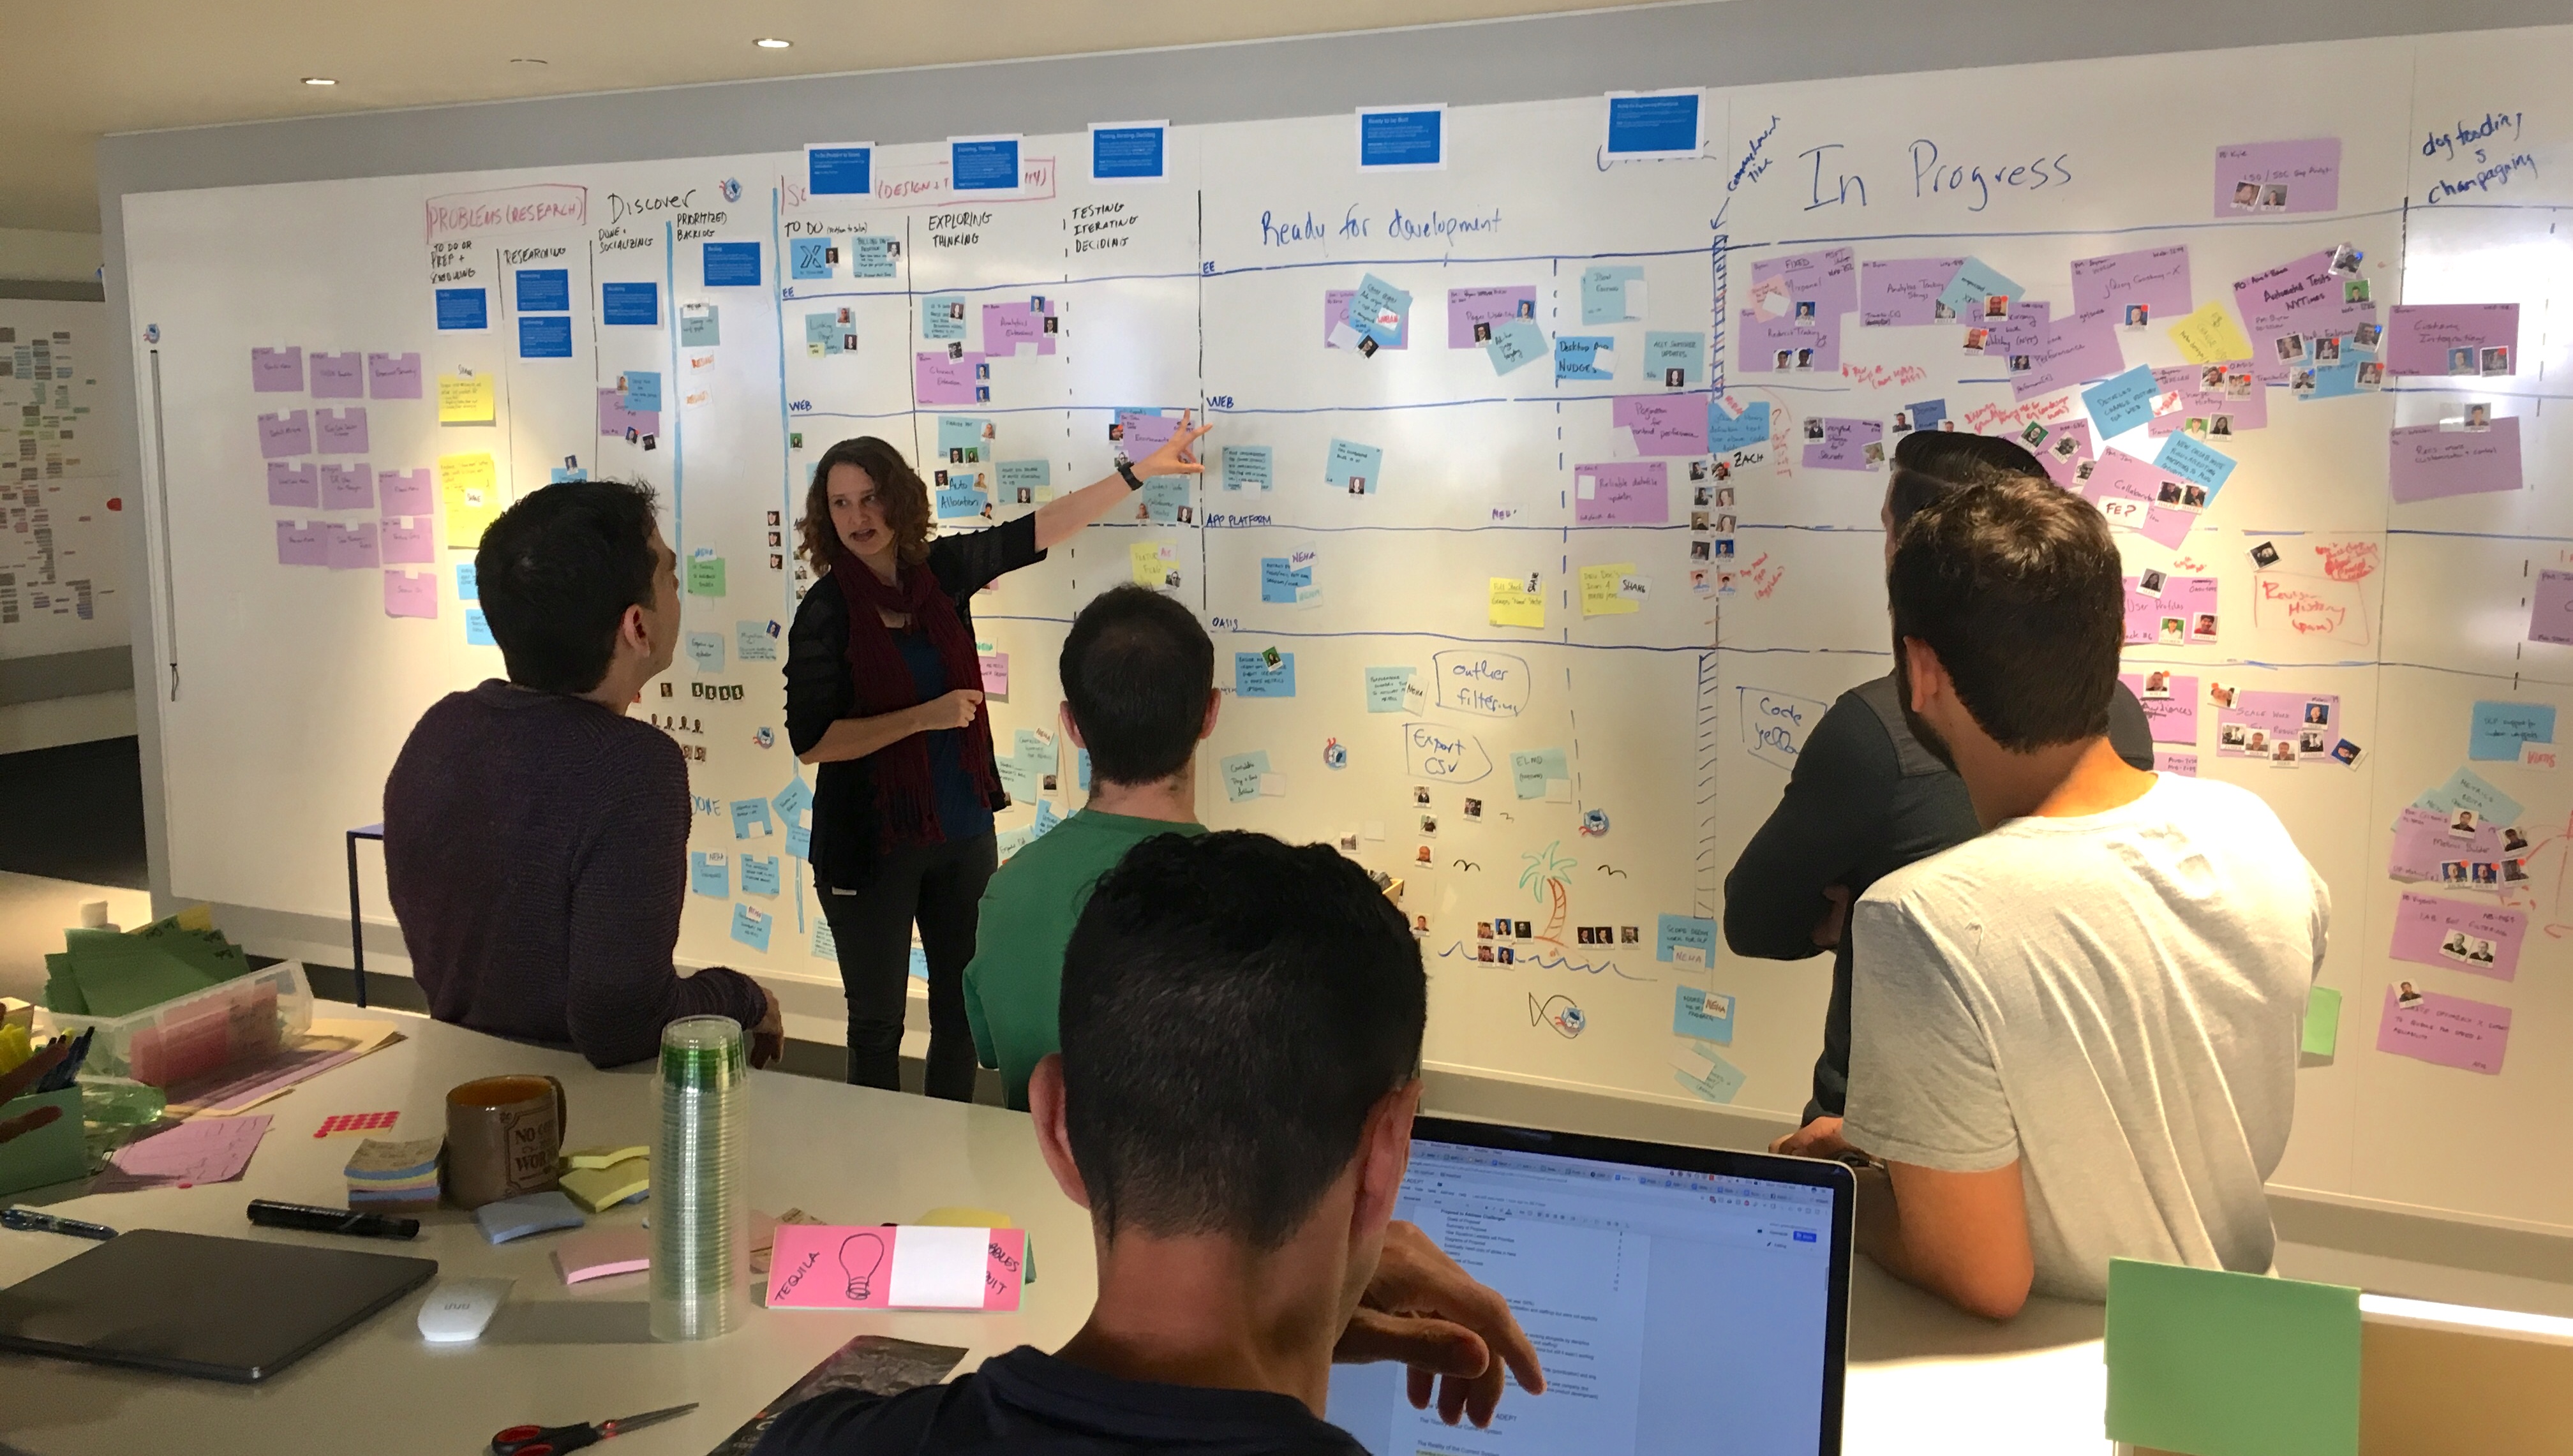 "Optimizely's Discovery kanban board in action"